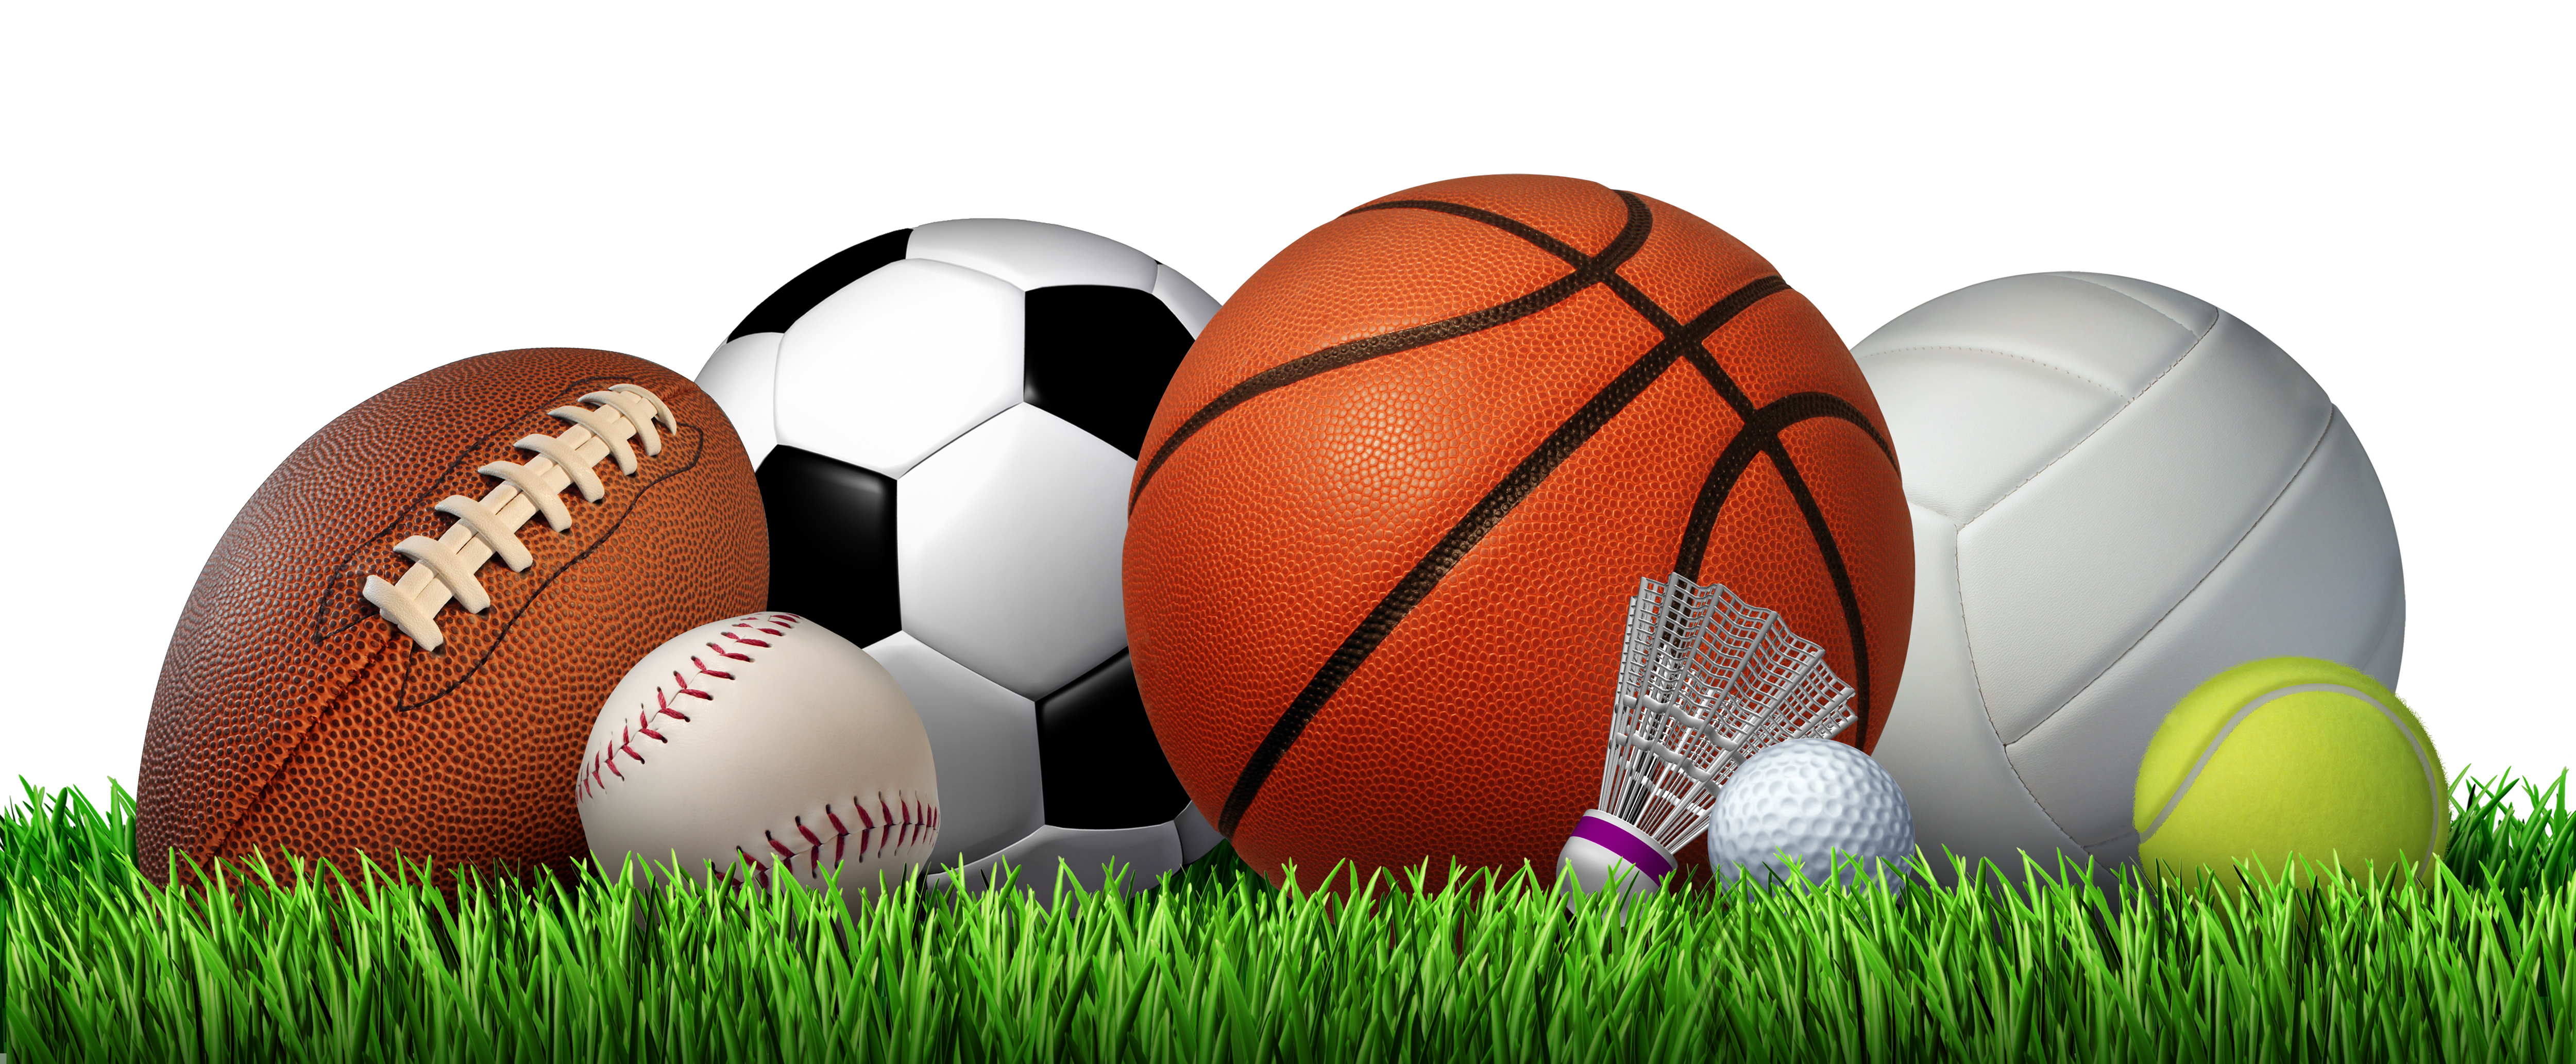 Amazing Sports Pictures & Backgrounds Sport Balls On Grass